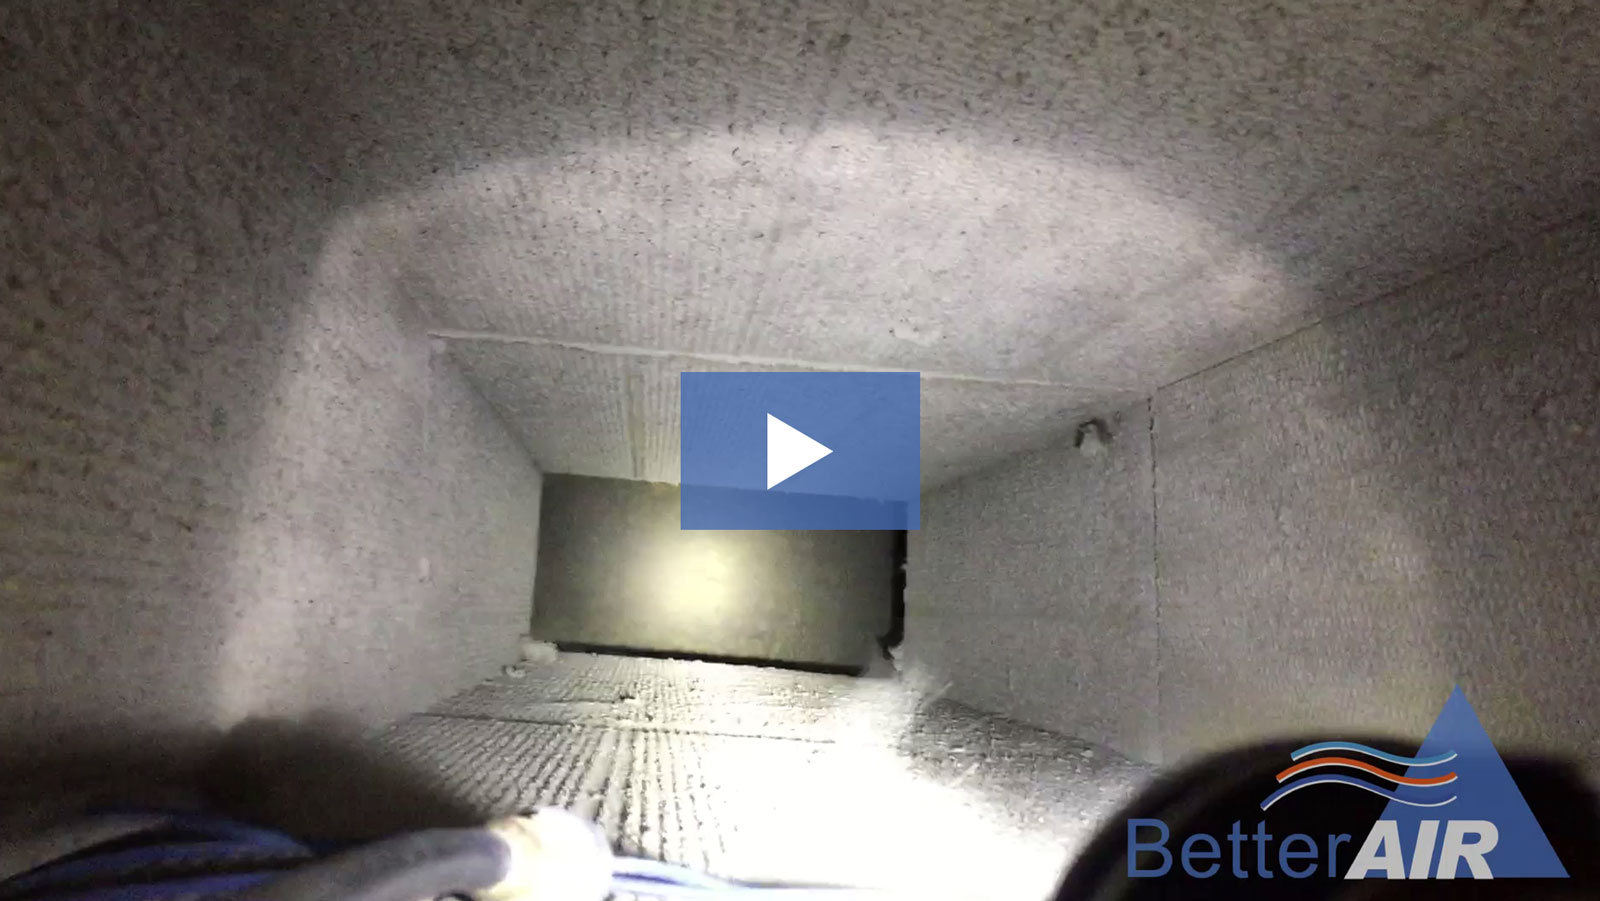 Video: Better Air Duct Cleaning - Commercial Fiber Glass Ducts